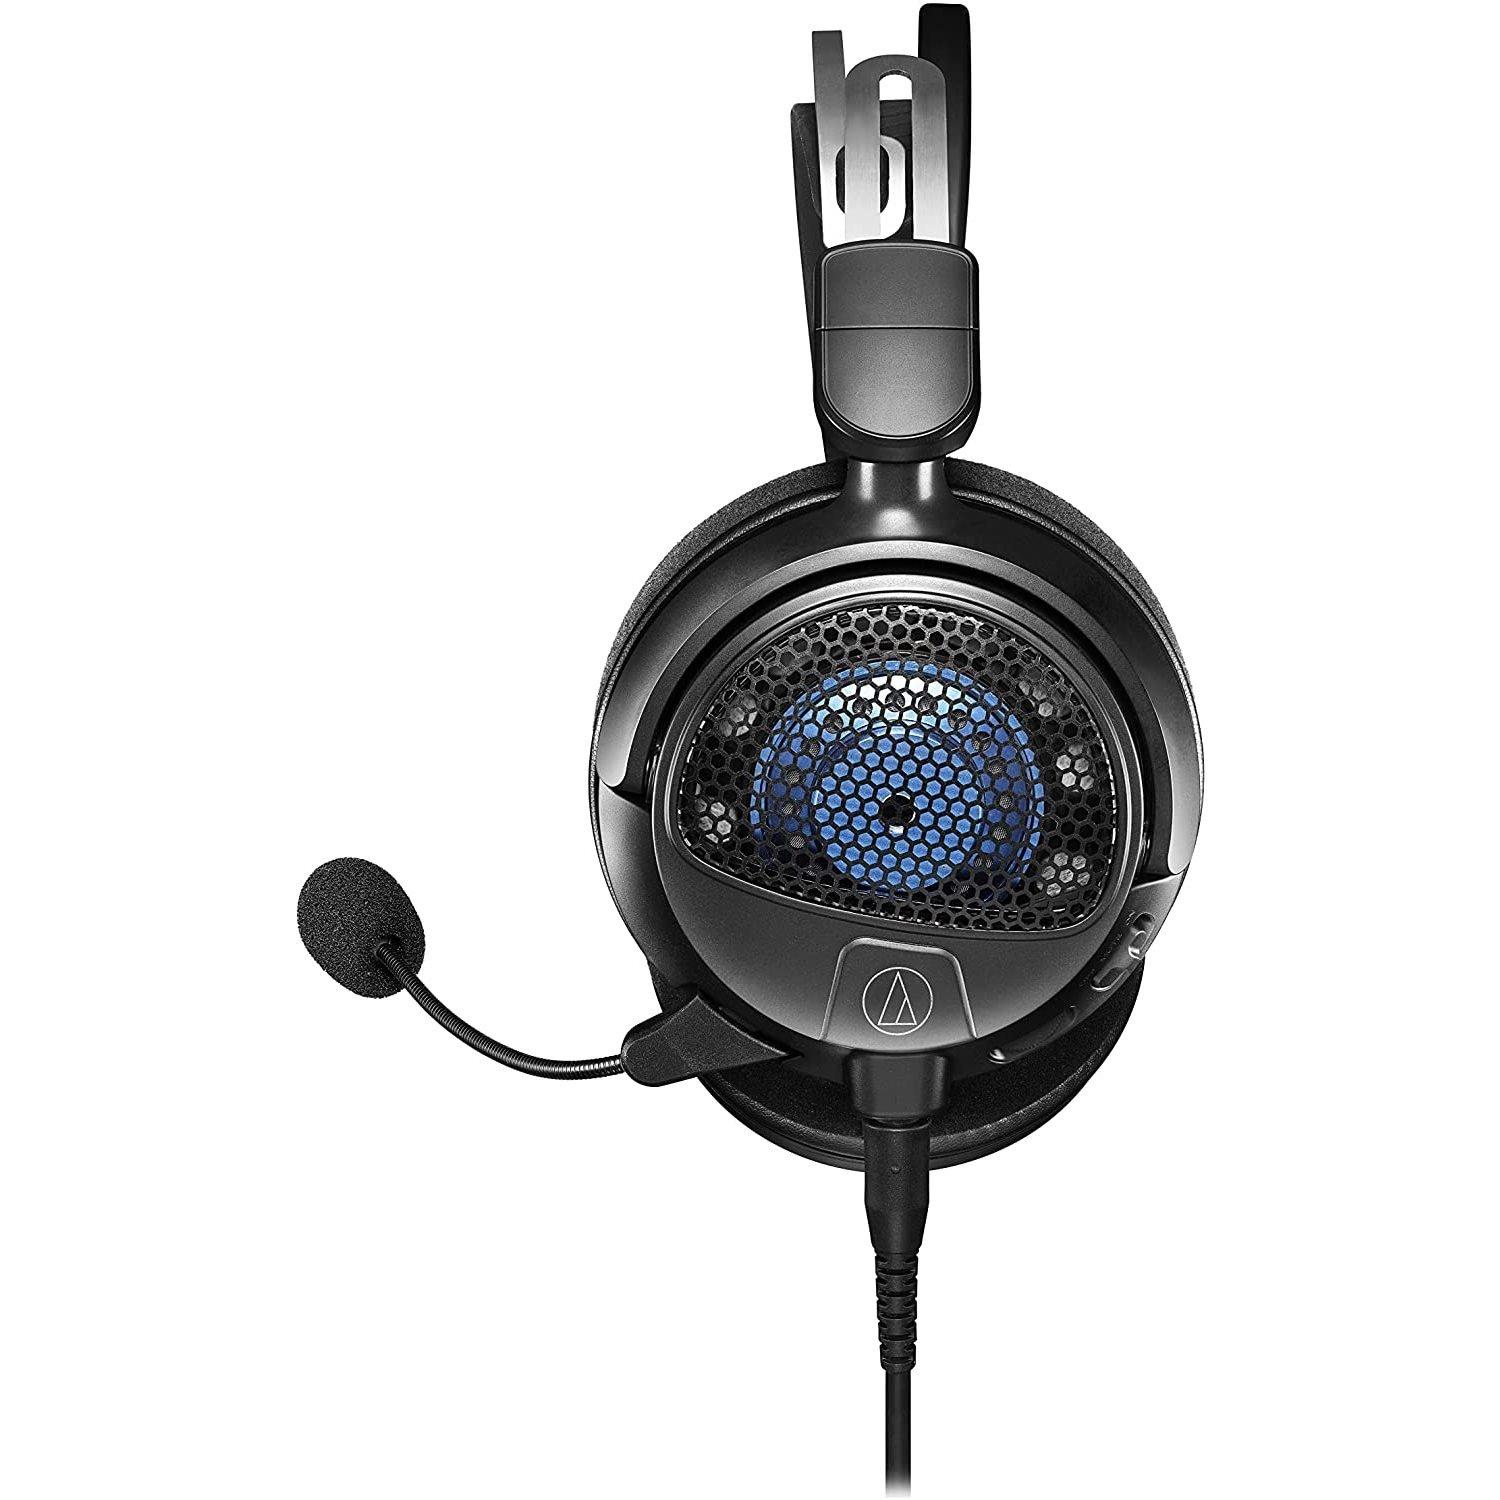 Audio-Technica ATH-GDL3 Wired Open-Back Gaming Headset